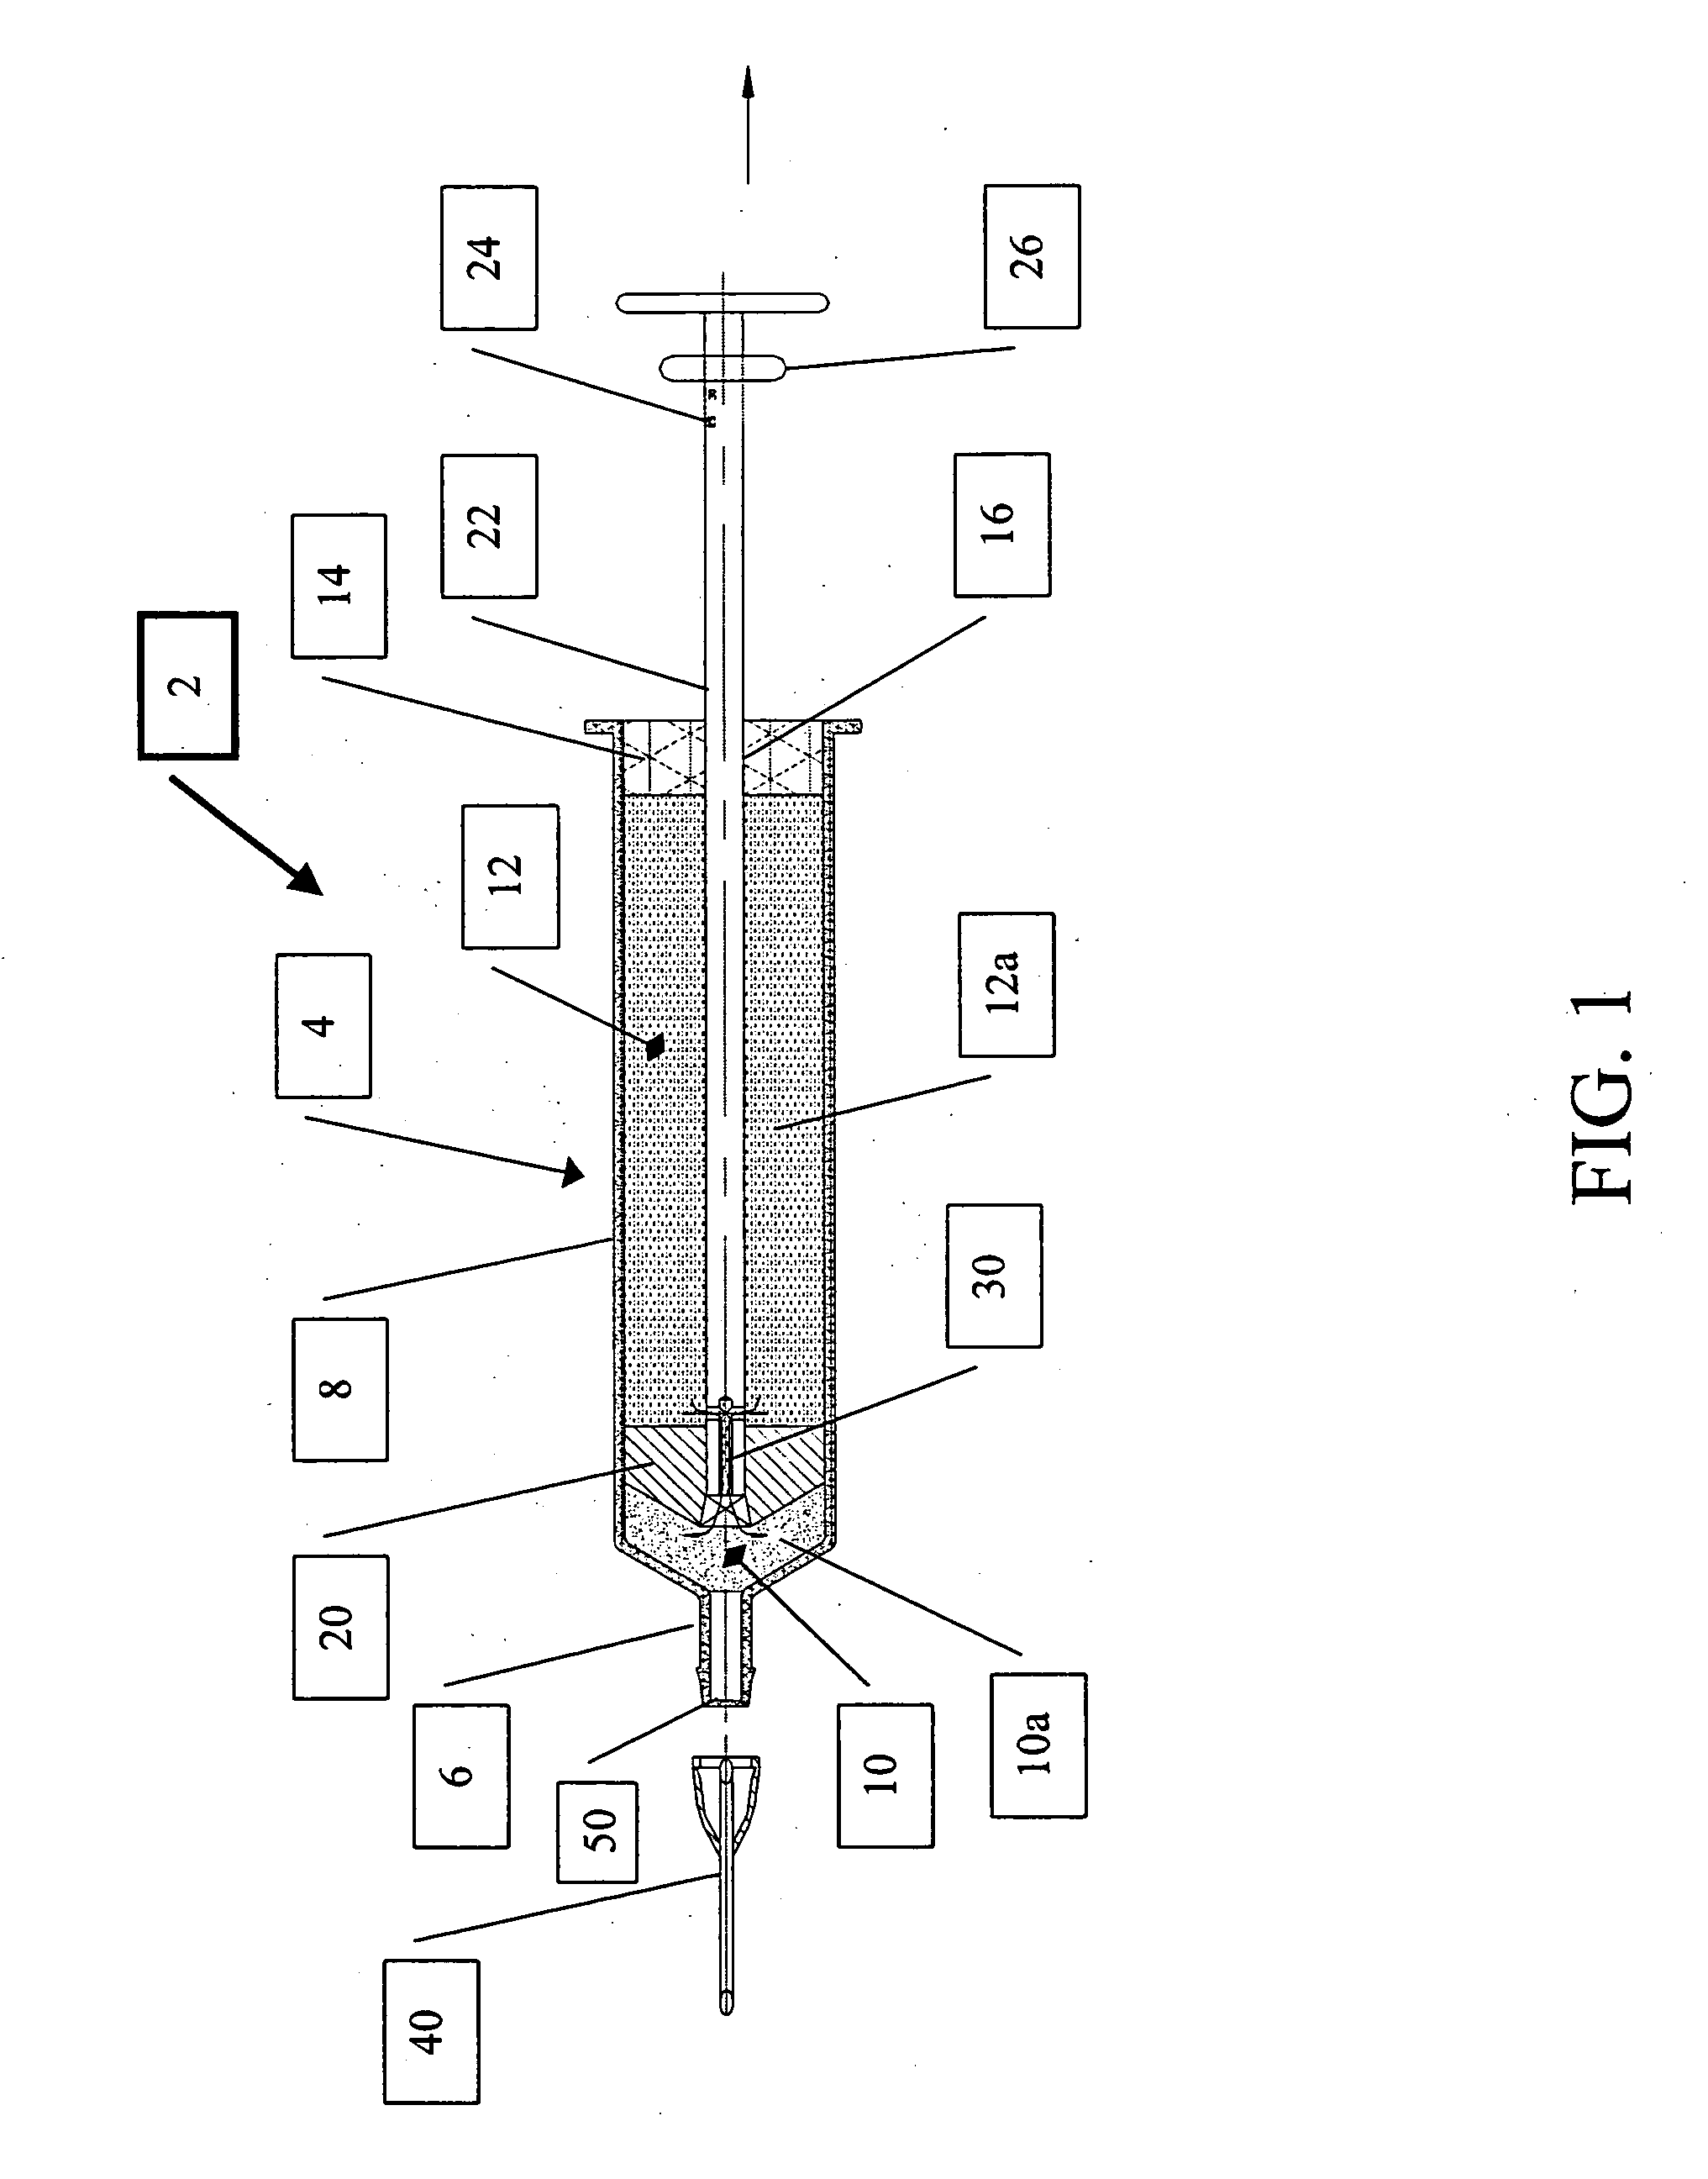 Multi-chamber mixing ampoule